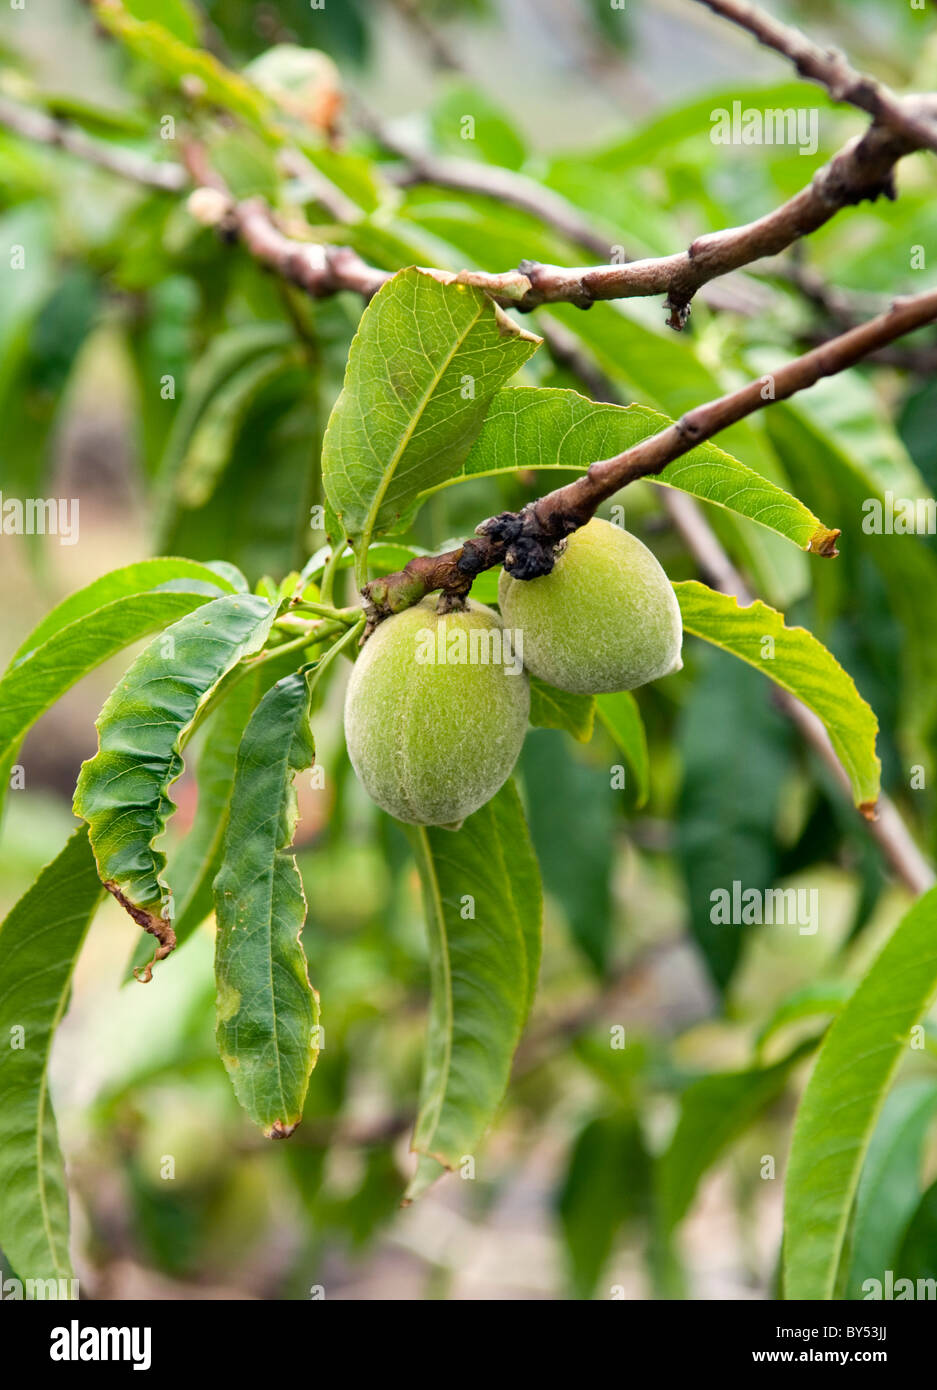 Island of El Hierro, Canary Islands, Spain. Flora & fauna. Young peach fruit growing on tree branch. Prunus persica Stock Photo